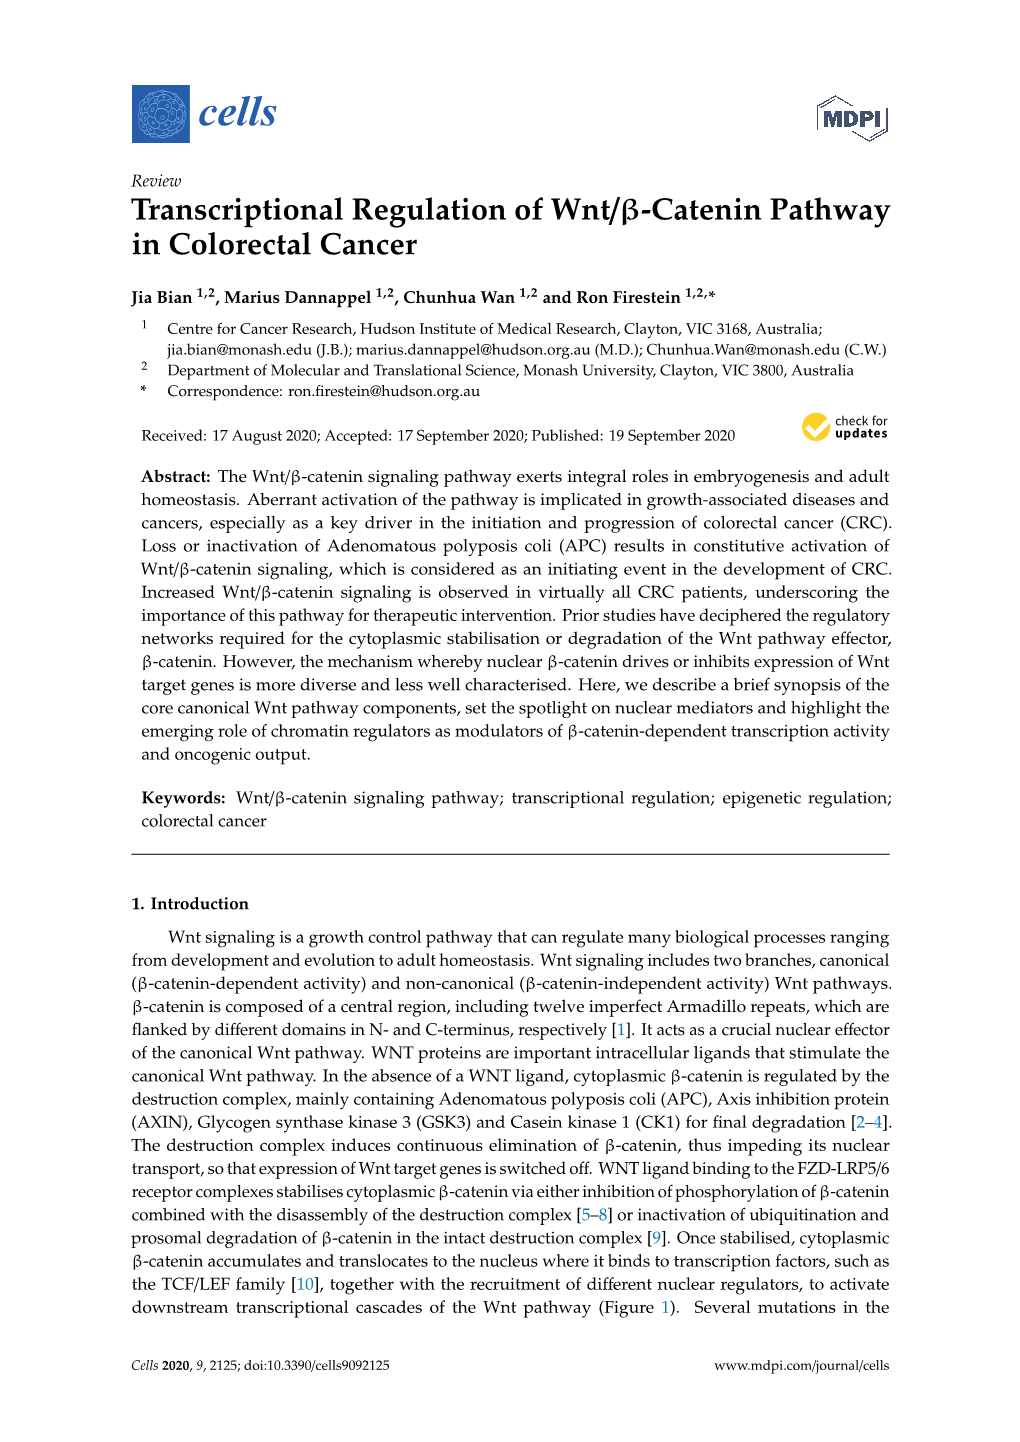 Transcriptional Regulation of Wnt/Β-Catenin Pathway in Colorectal Cancer